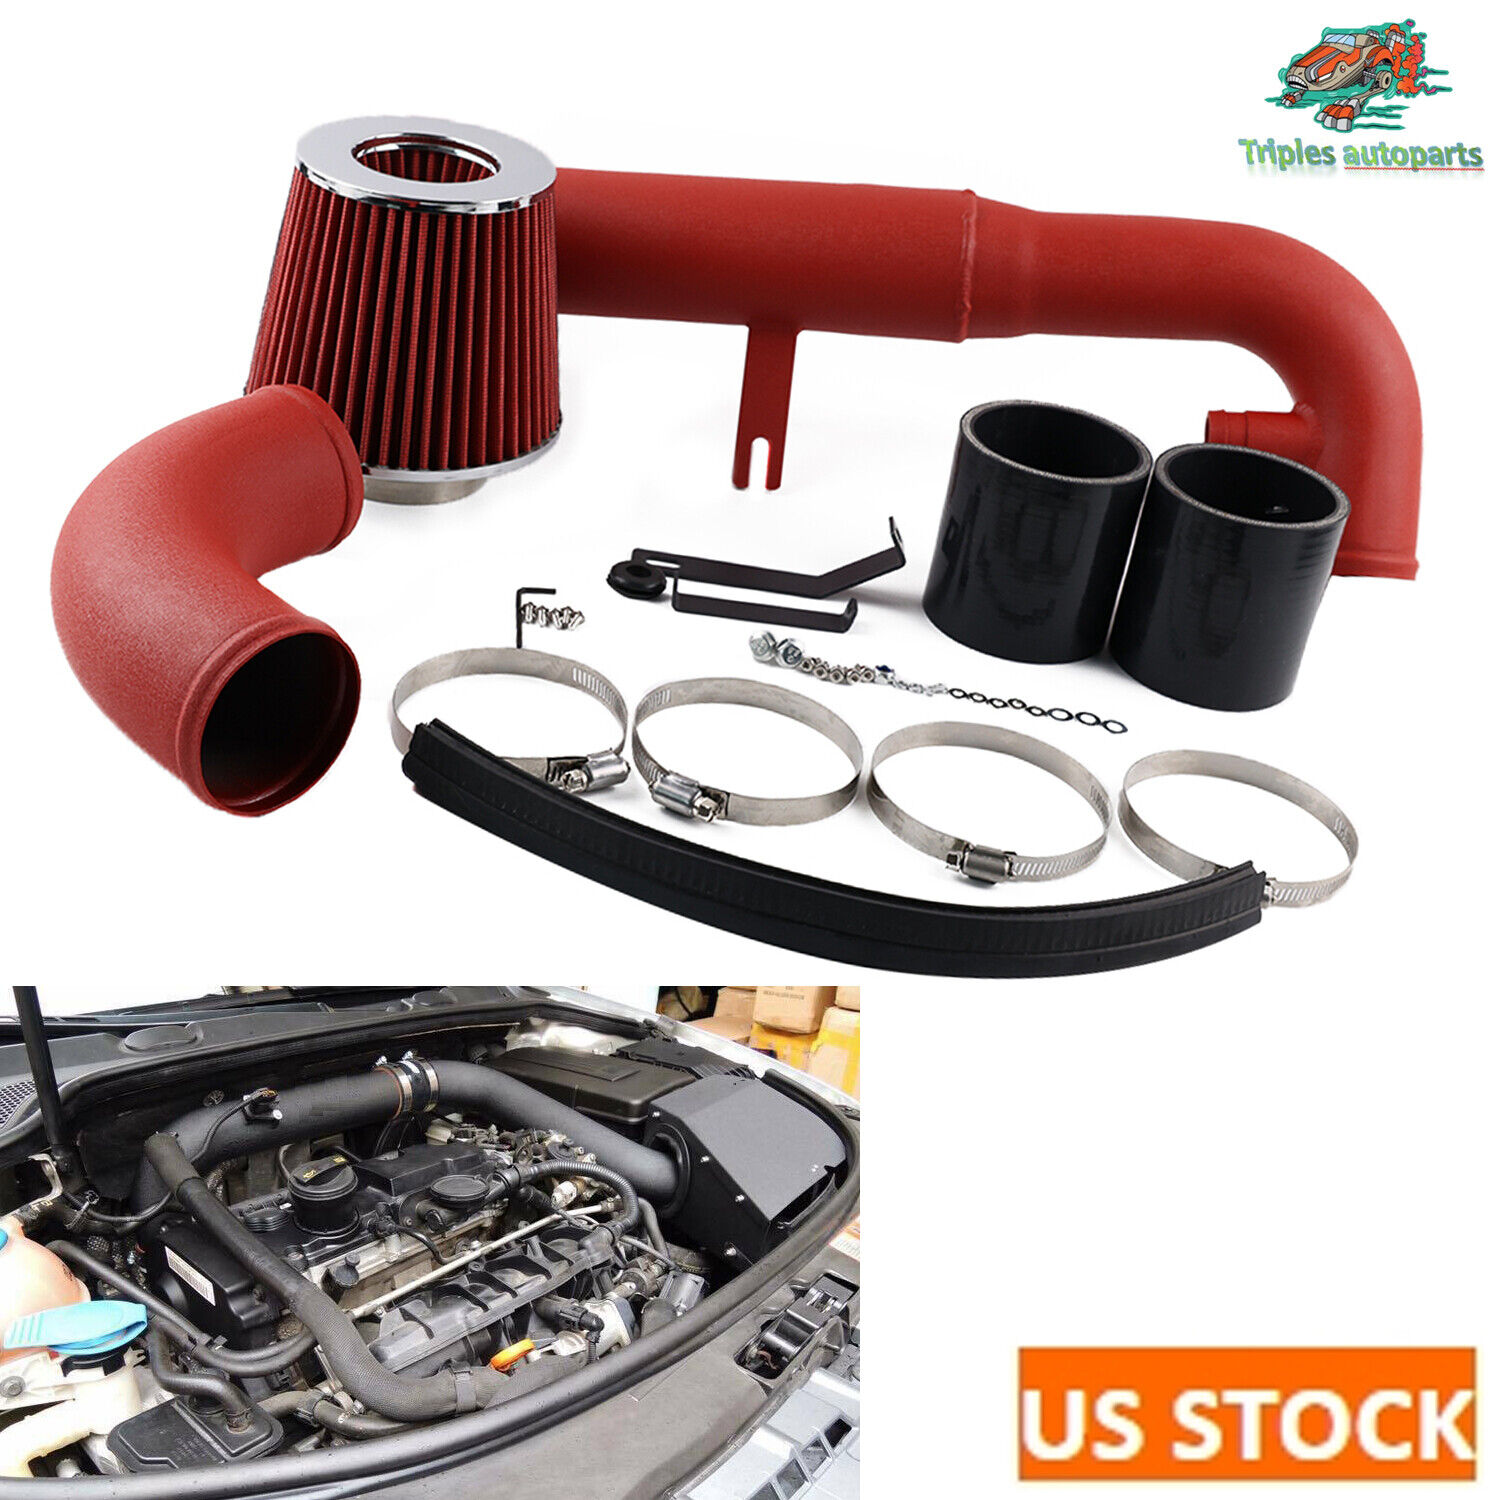 Red Cold Air Intake Pipe Filter + Shield For 11-12 VW Golf GTI MK6 MK5 2.0 EA113